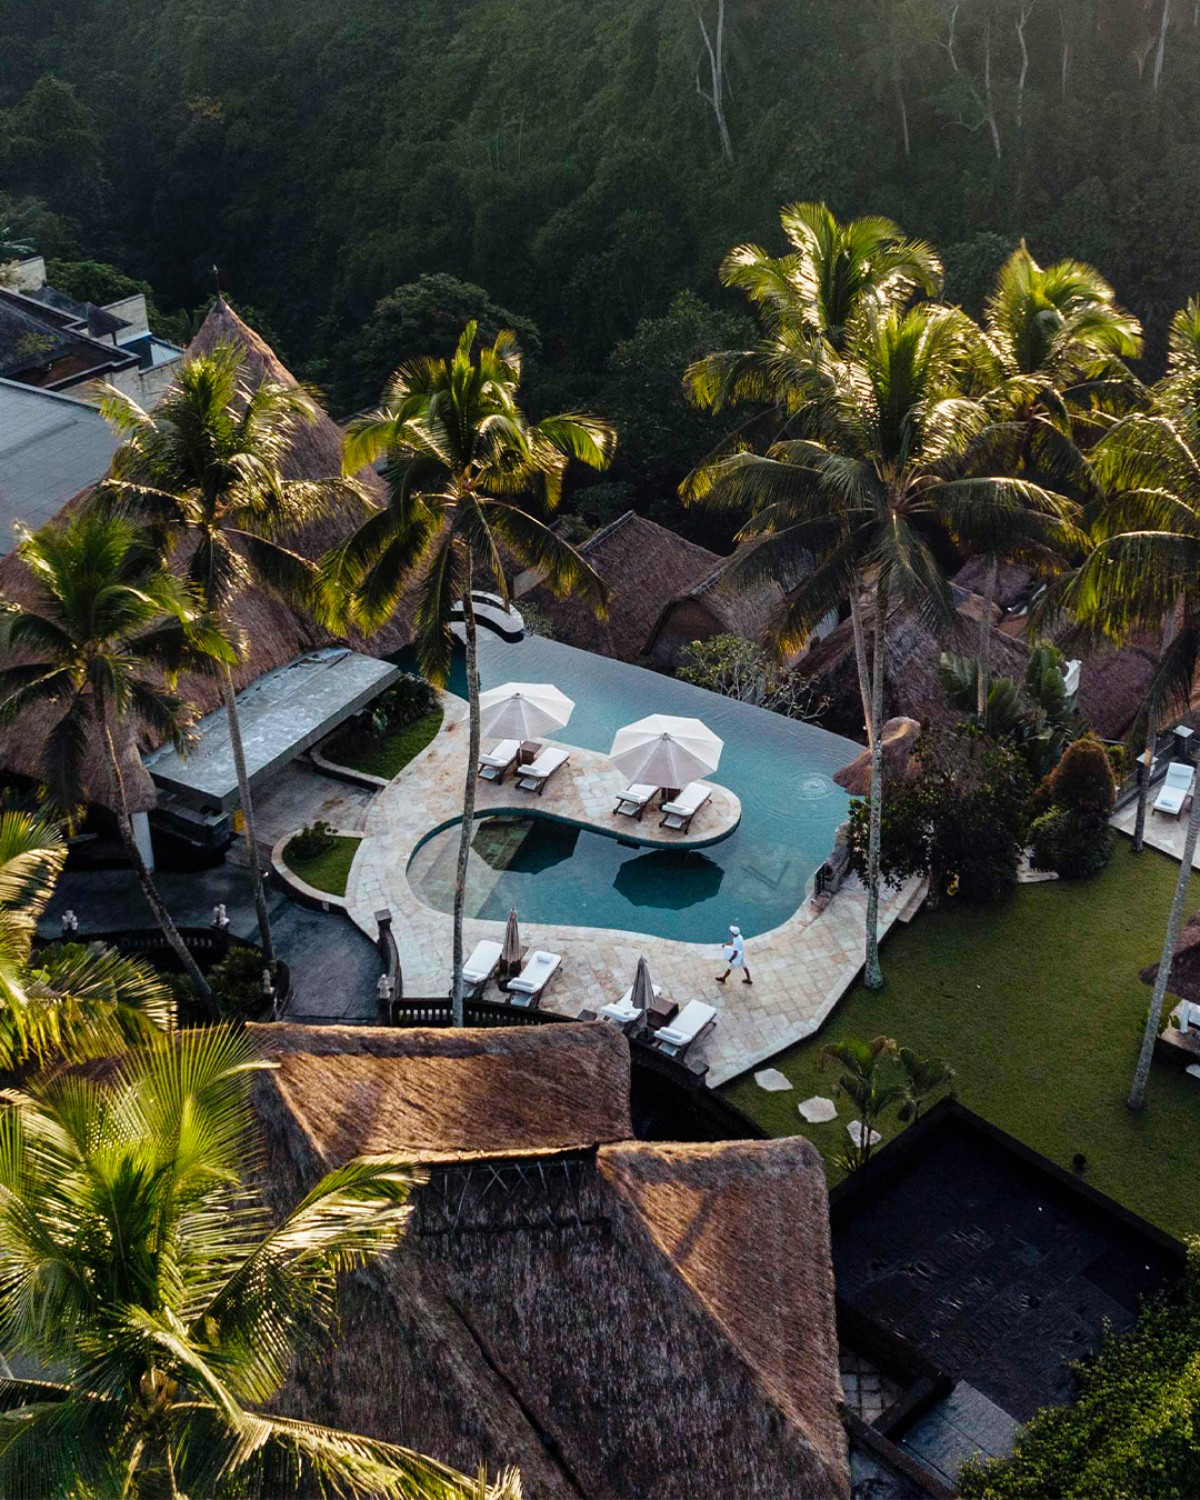 An elevated view of a luxurious resort with thatched roofs, a pristine pool, and the jungle backdrop.